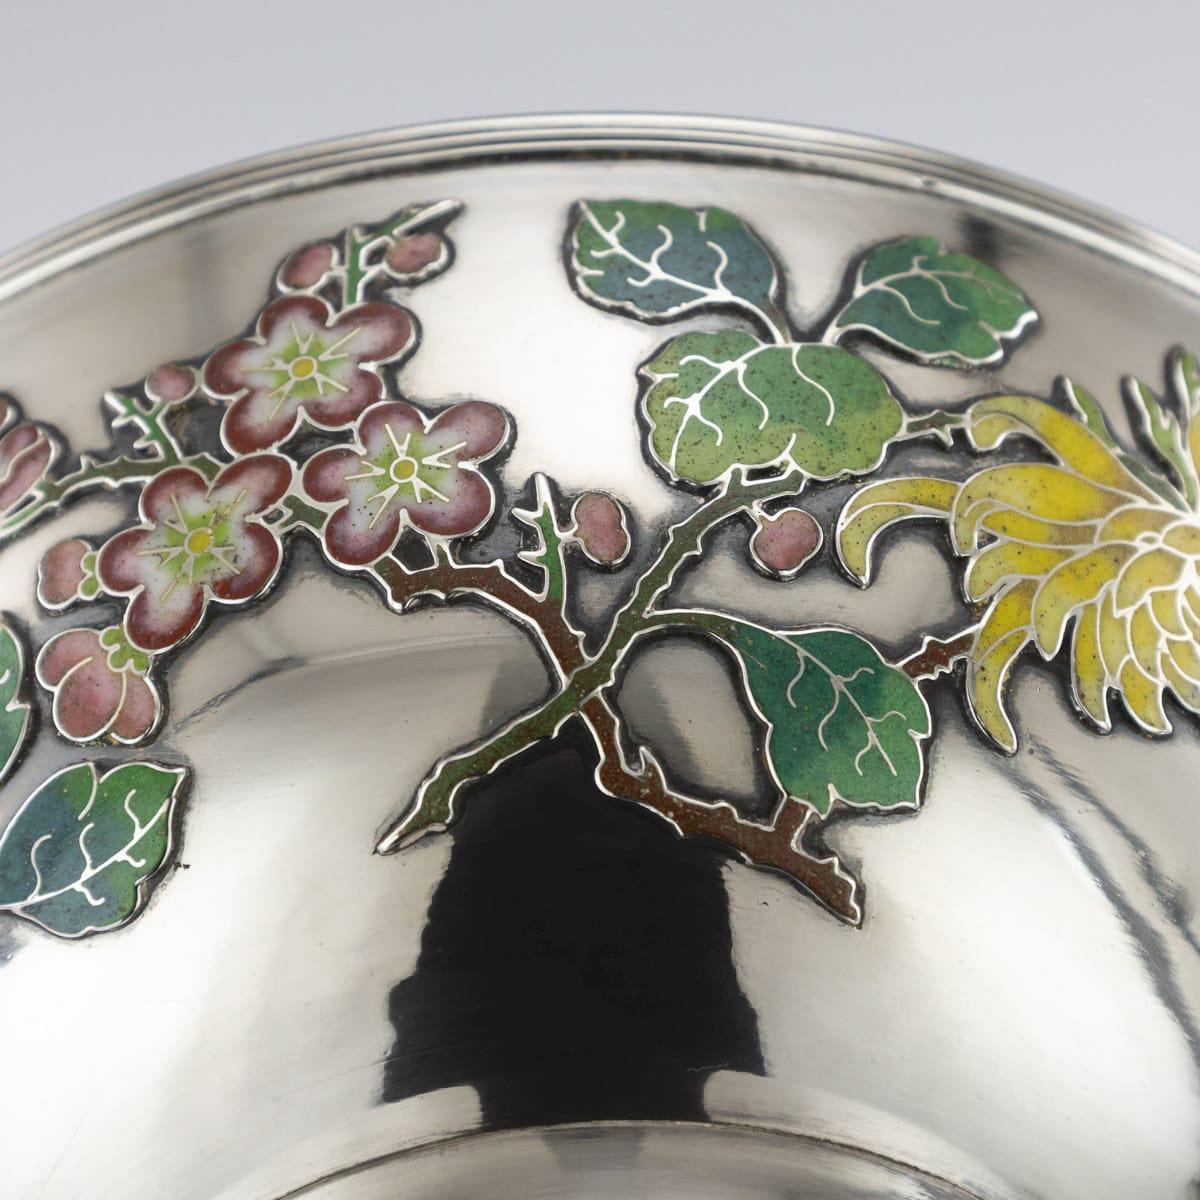 19th Century Rare Chinese Export Solid Silver & Enamel Bowl, Wo Kwong circa 1890 For Sale 10